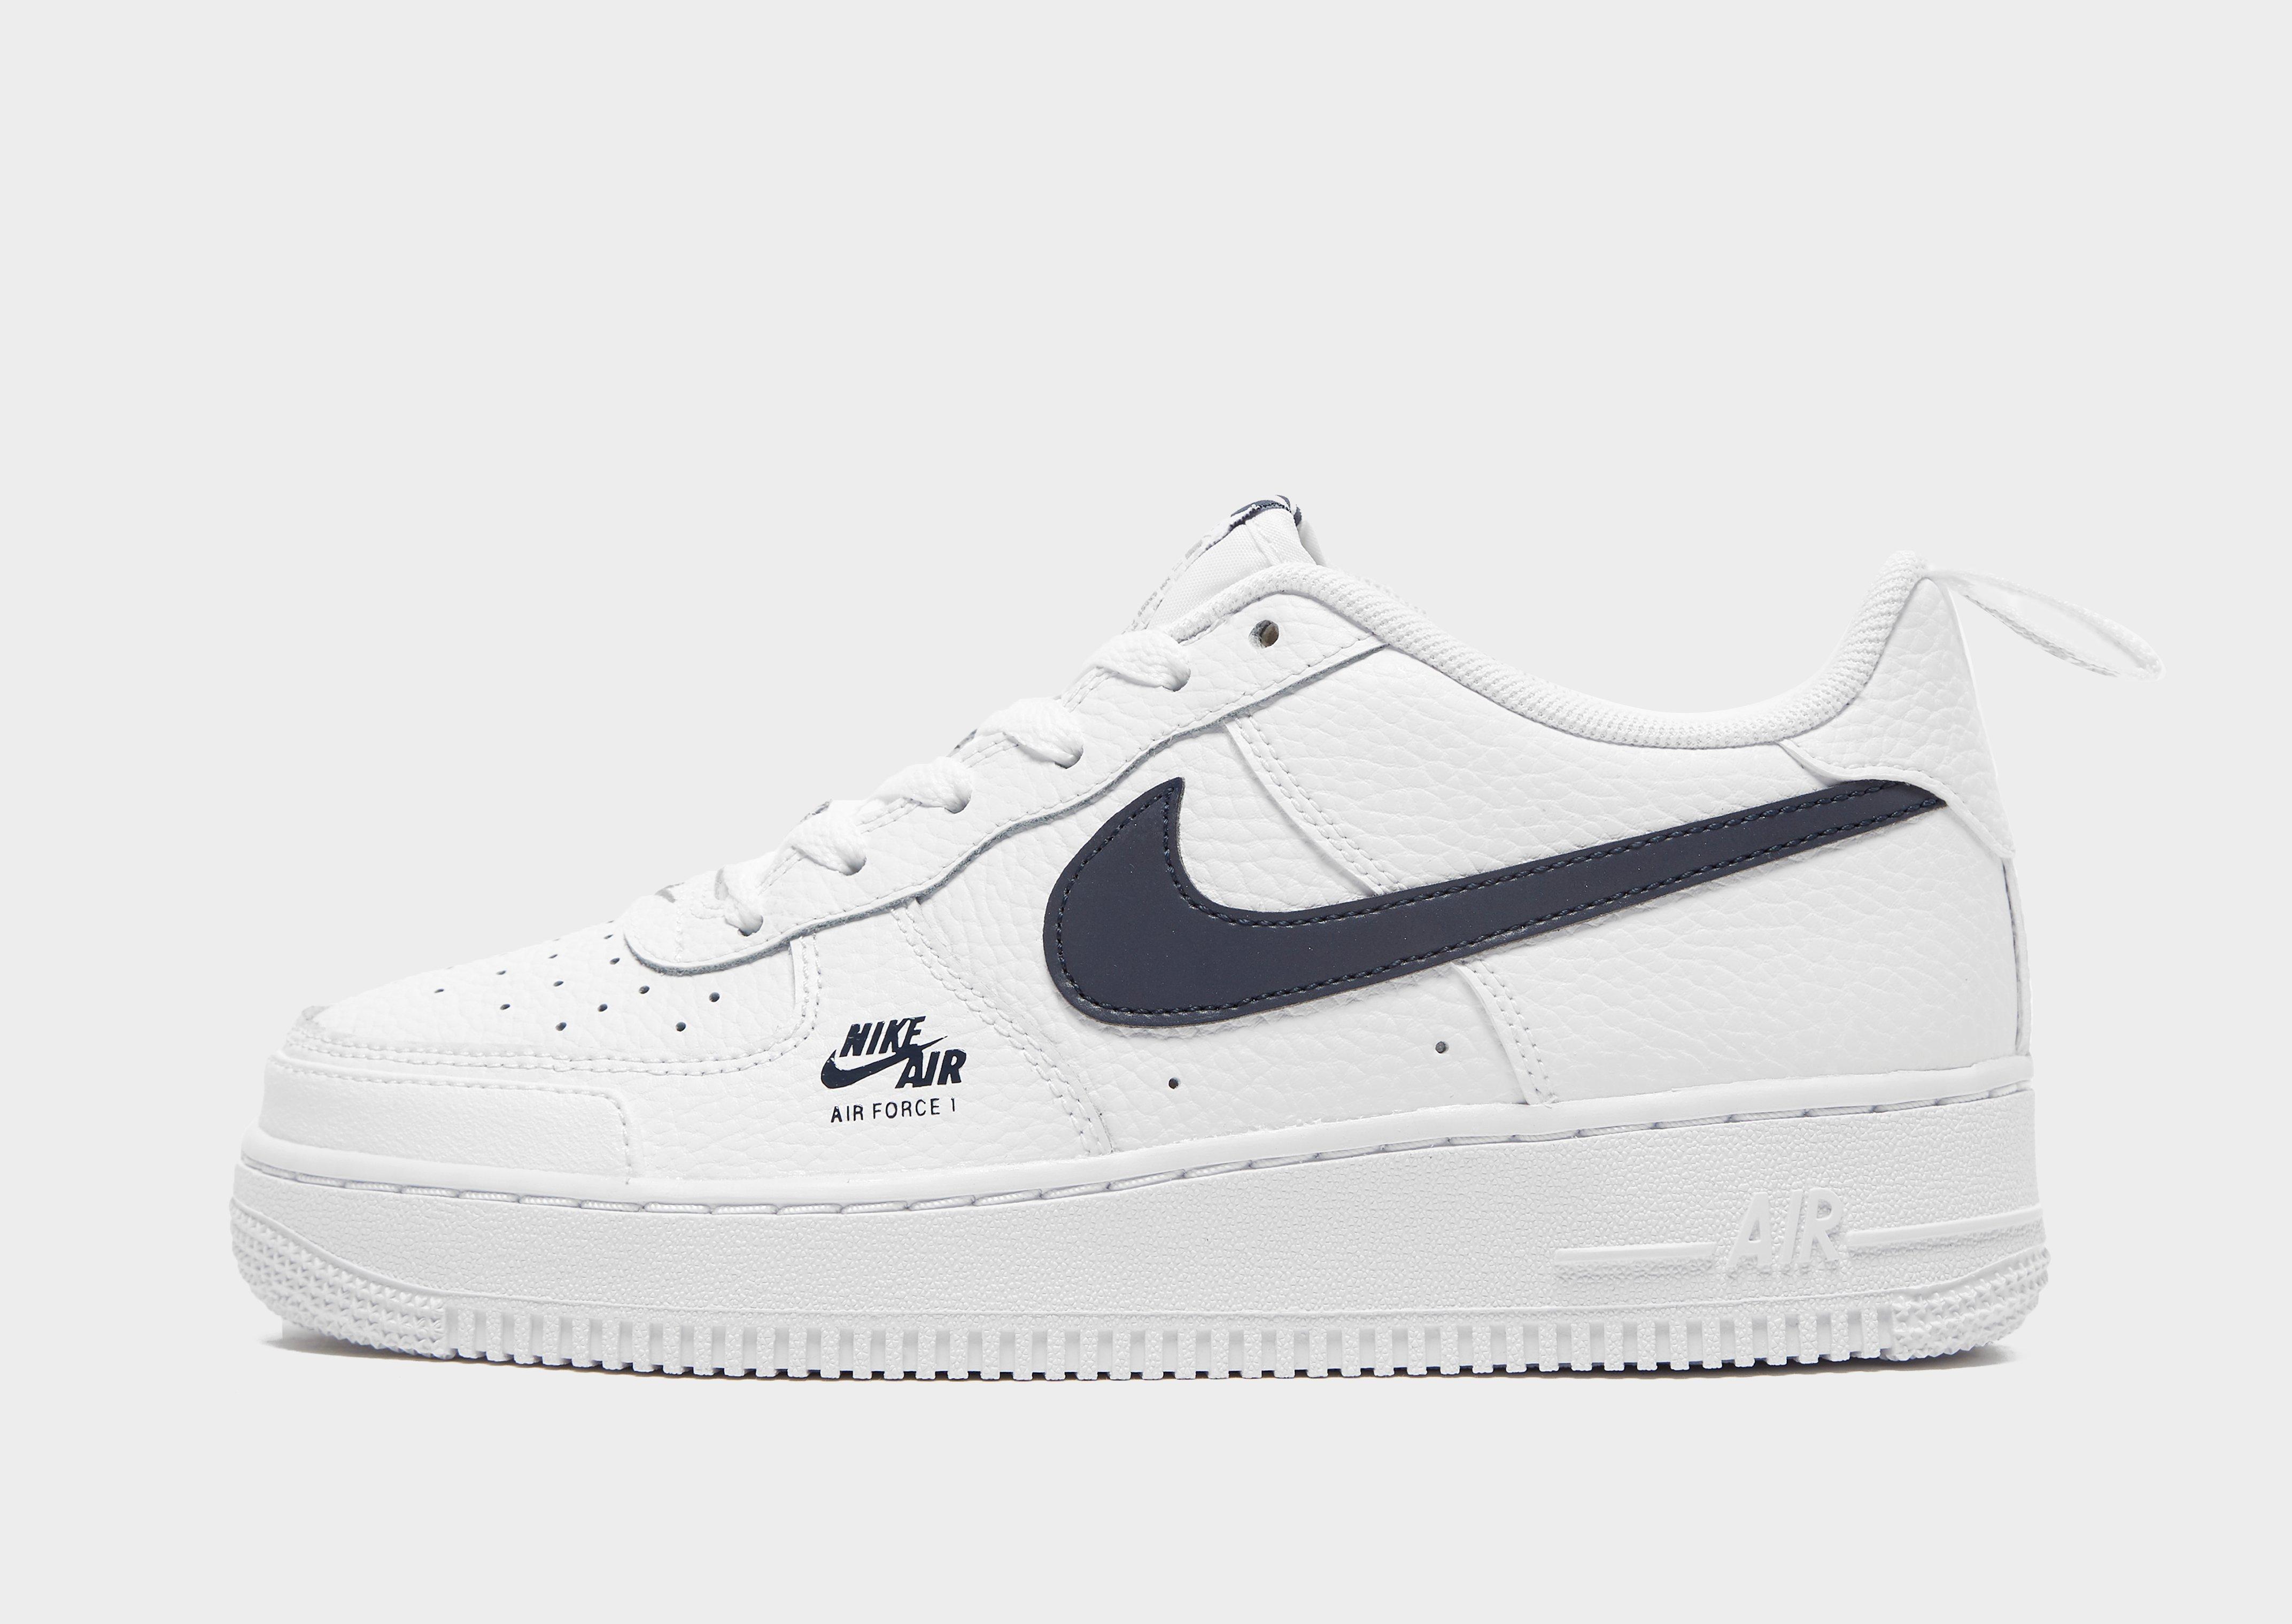 junior nike air force 1 black and white